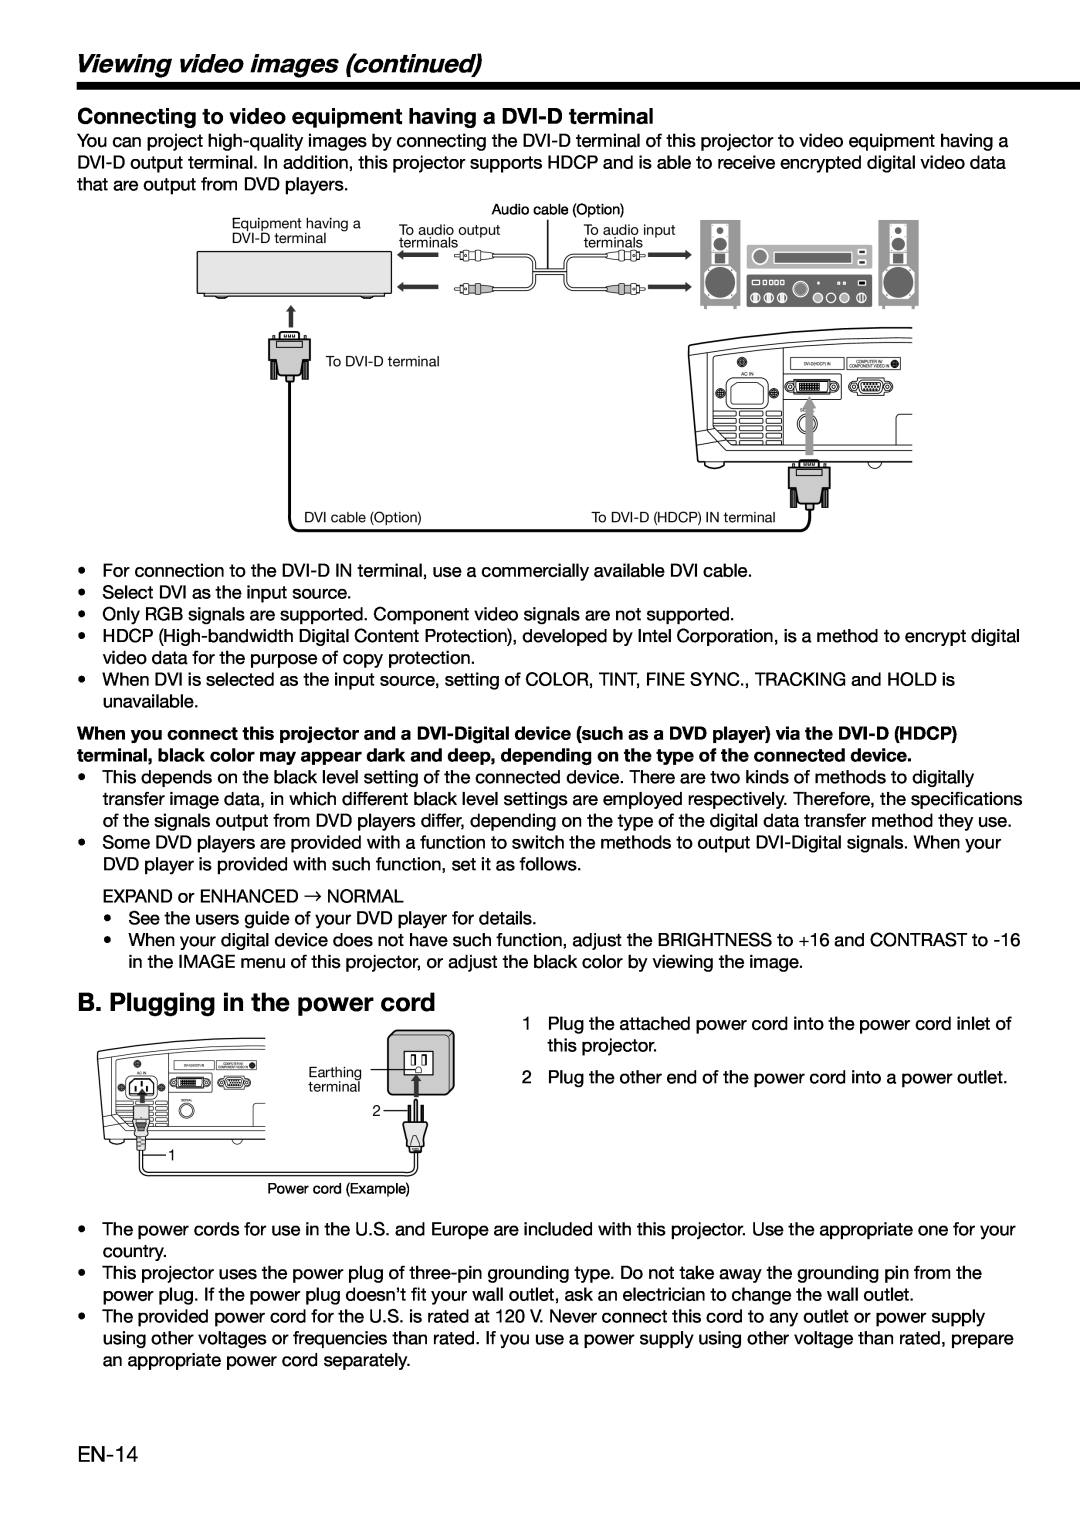 Mitsubishi Electronics HC910 user manual Viewing video images continued, B. Plugging in the power cord 